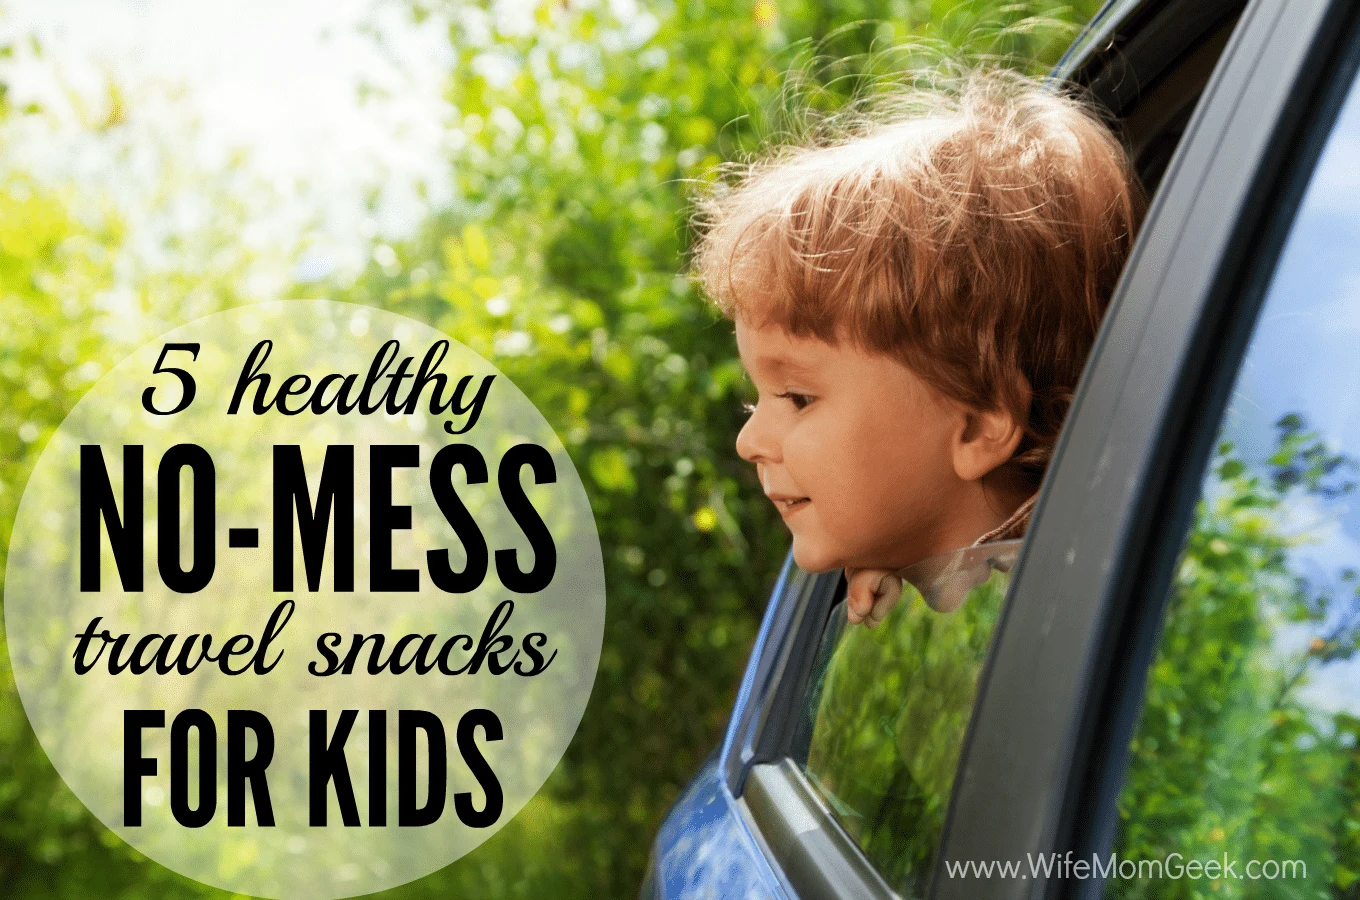 kids-car-travel-hack-snack-caddy - Toddler Fun Learning